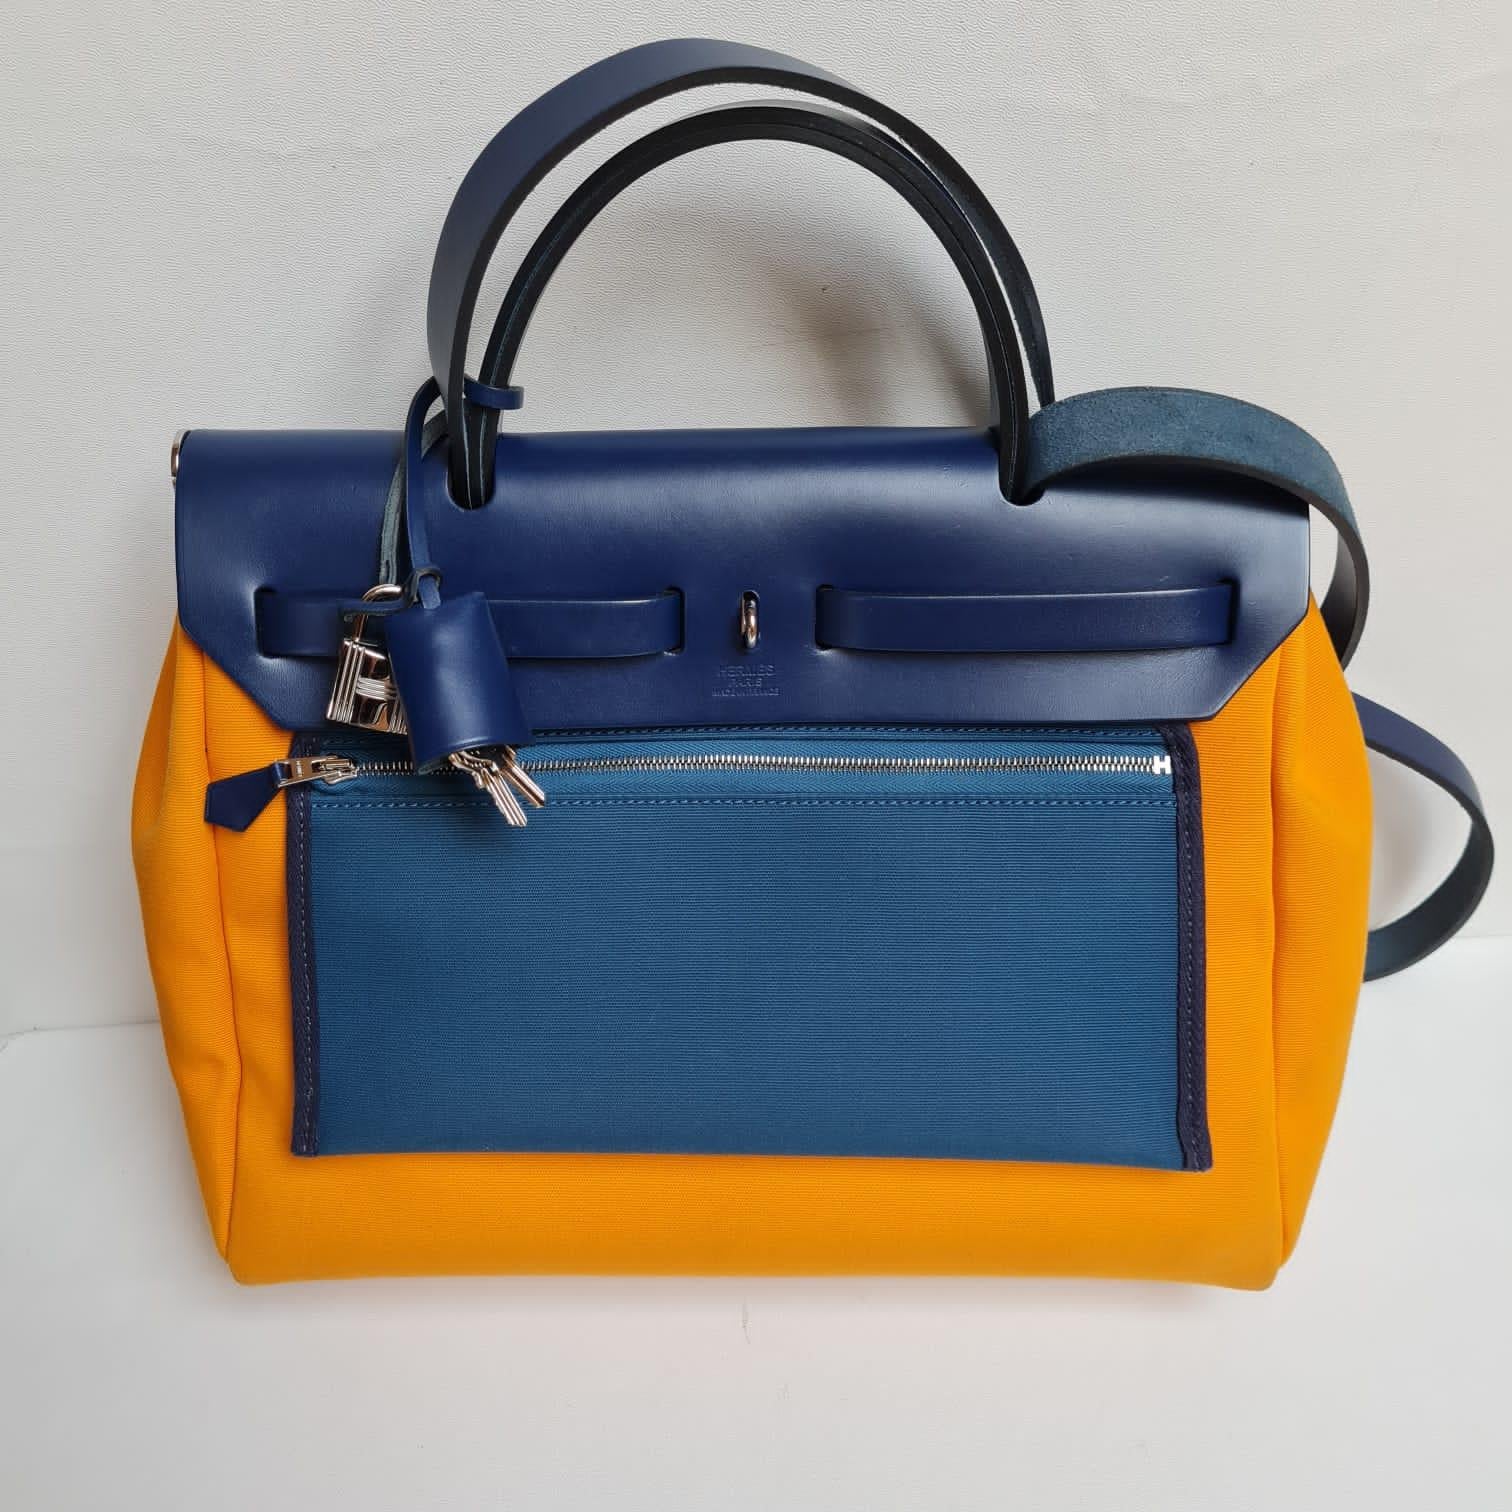 Beautiful new herbag 31 in navy and orange. Overall still in excellent condition with minor scratches on the flap top. Comes with its inner pouch and dust bag. Will give entrupy certificate of the item.